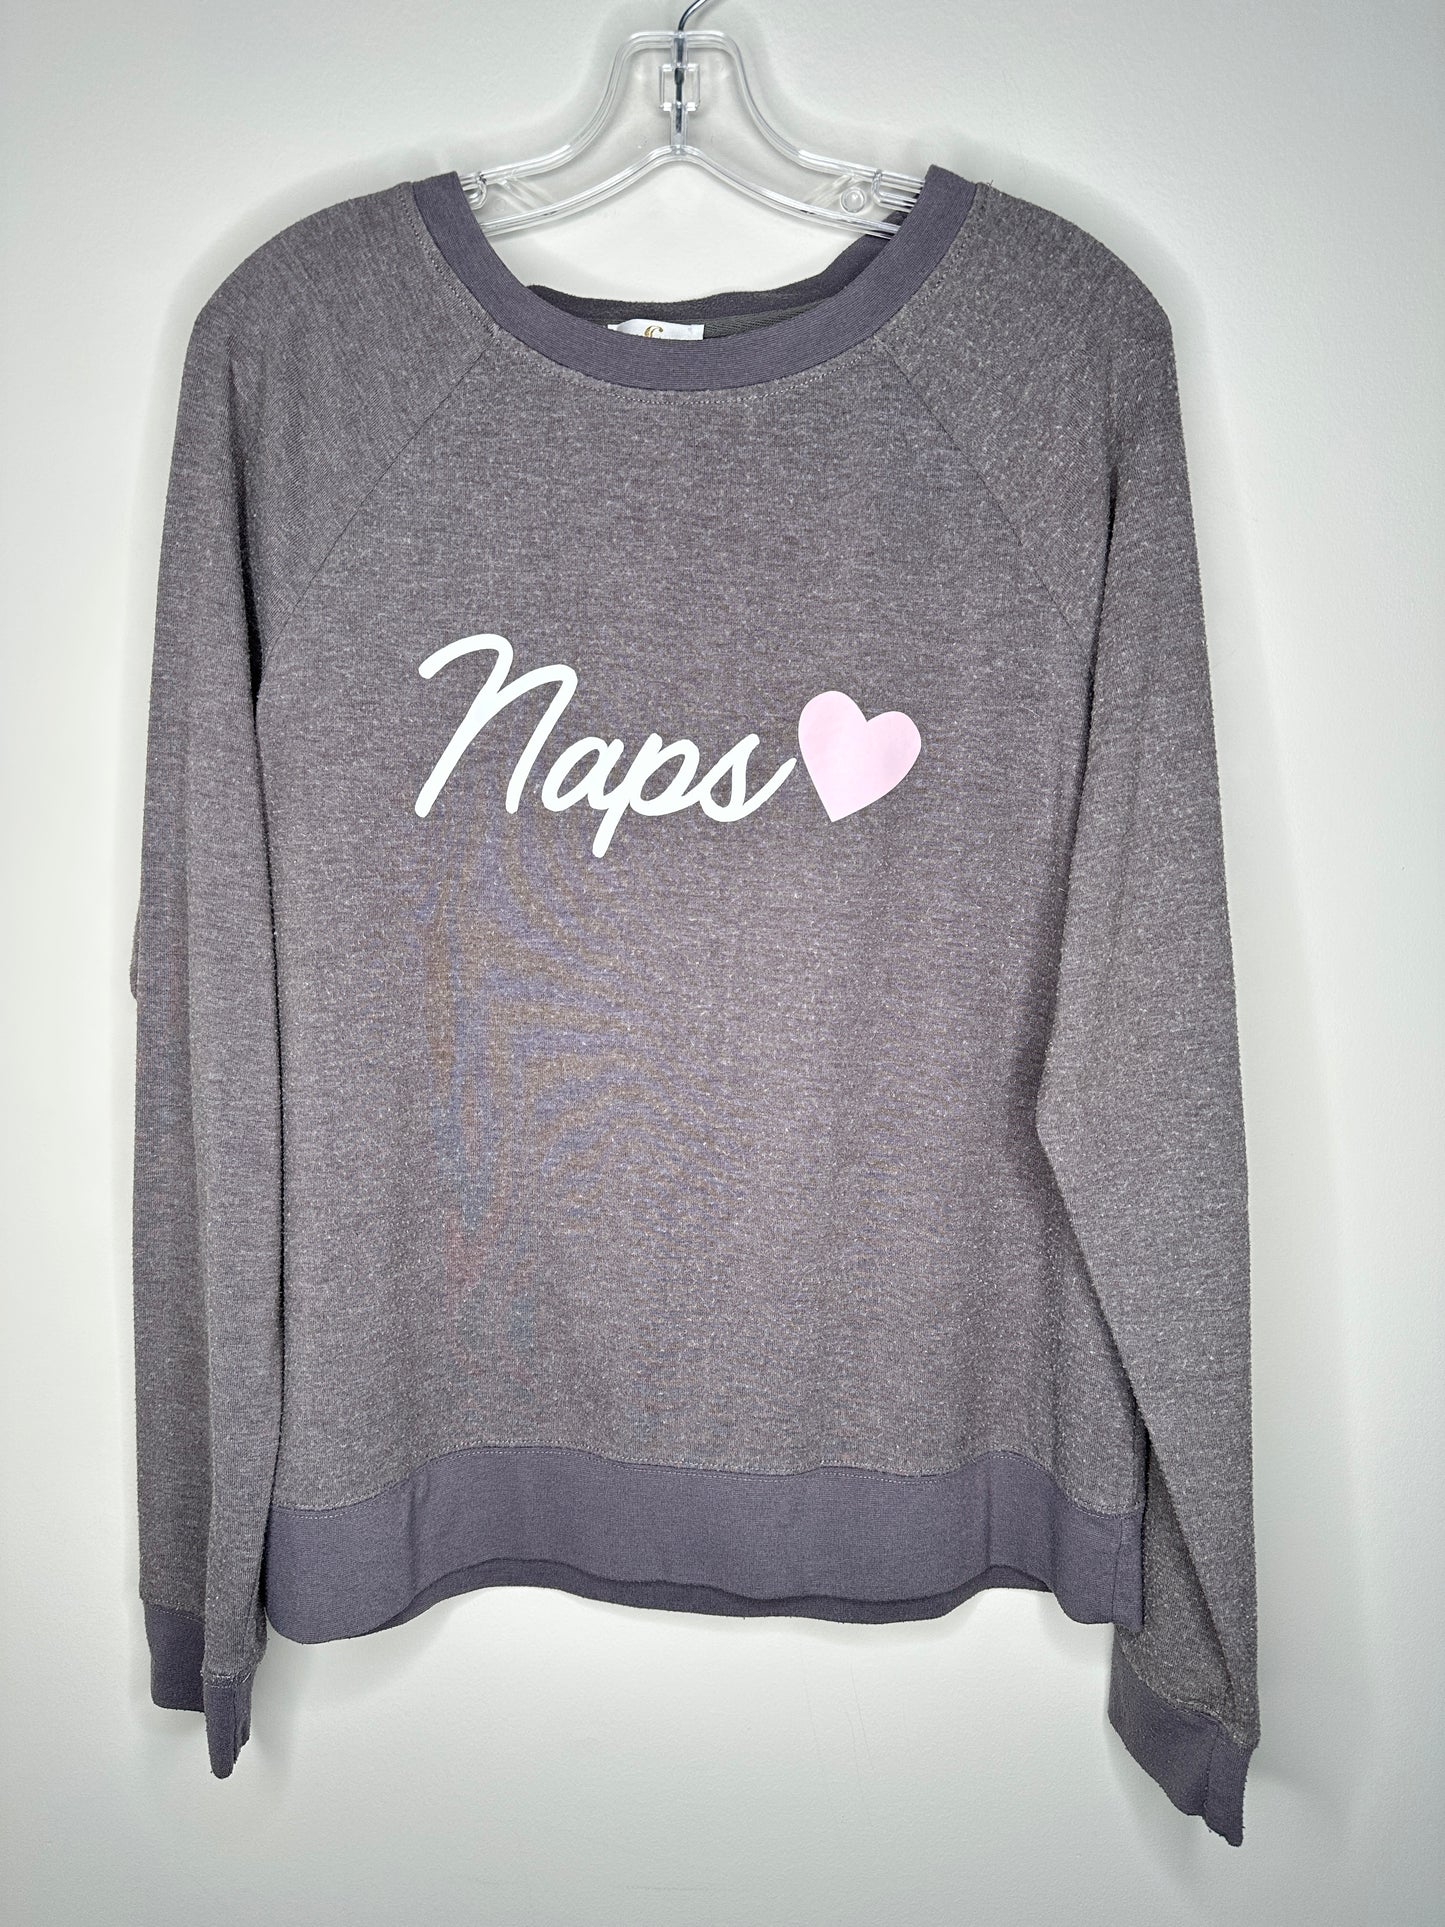 C Apparel Size L Brown Heather Long Sleeve "Naps" Top